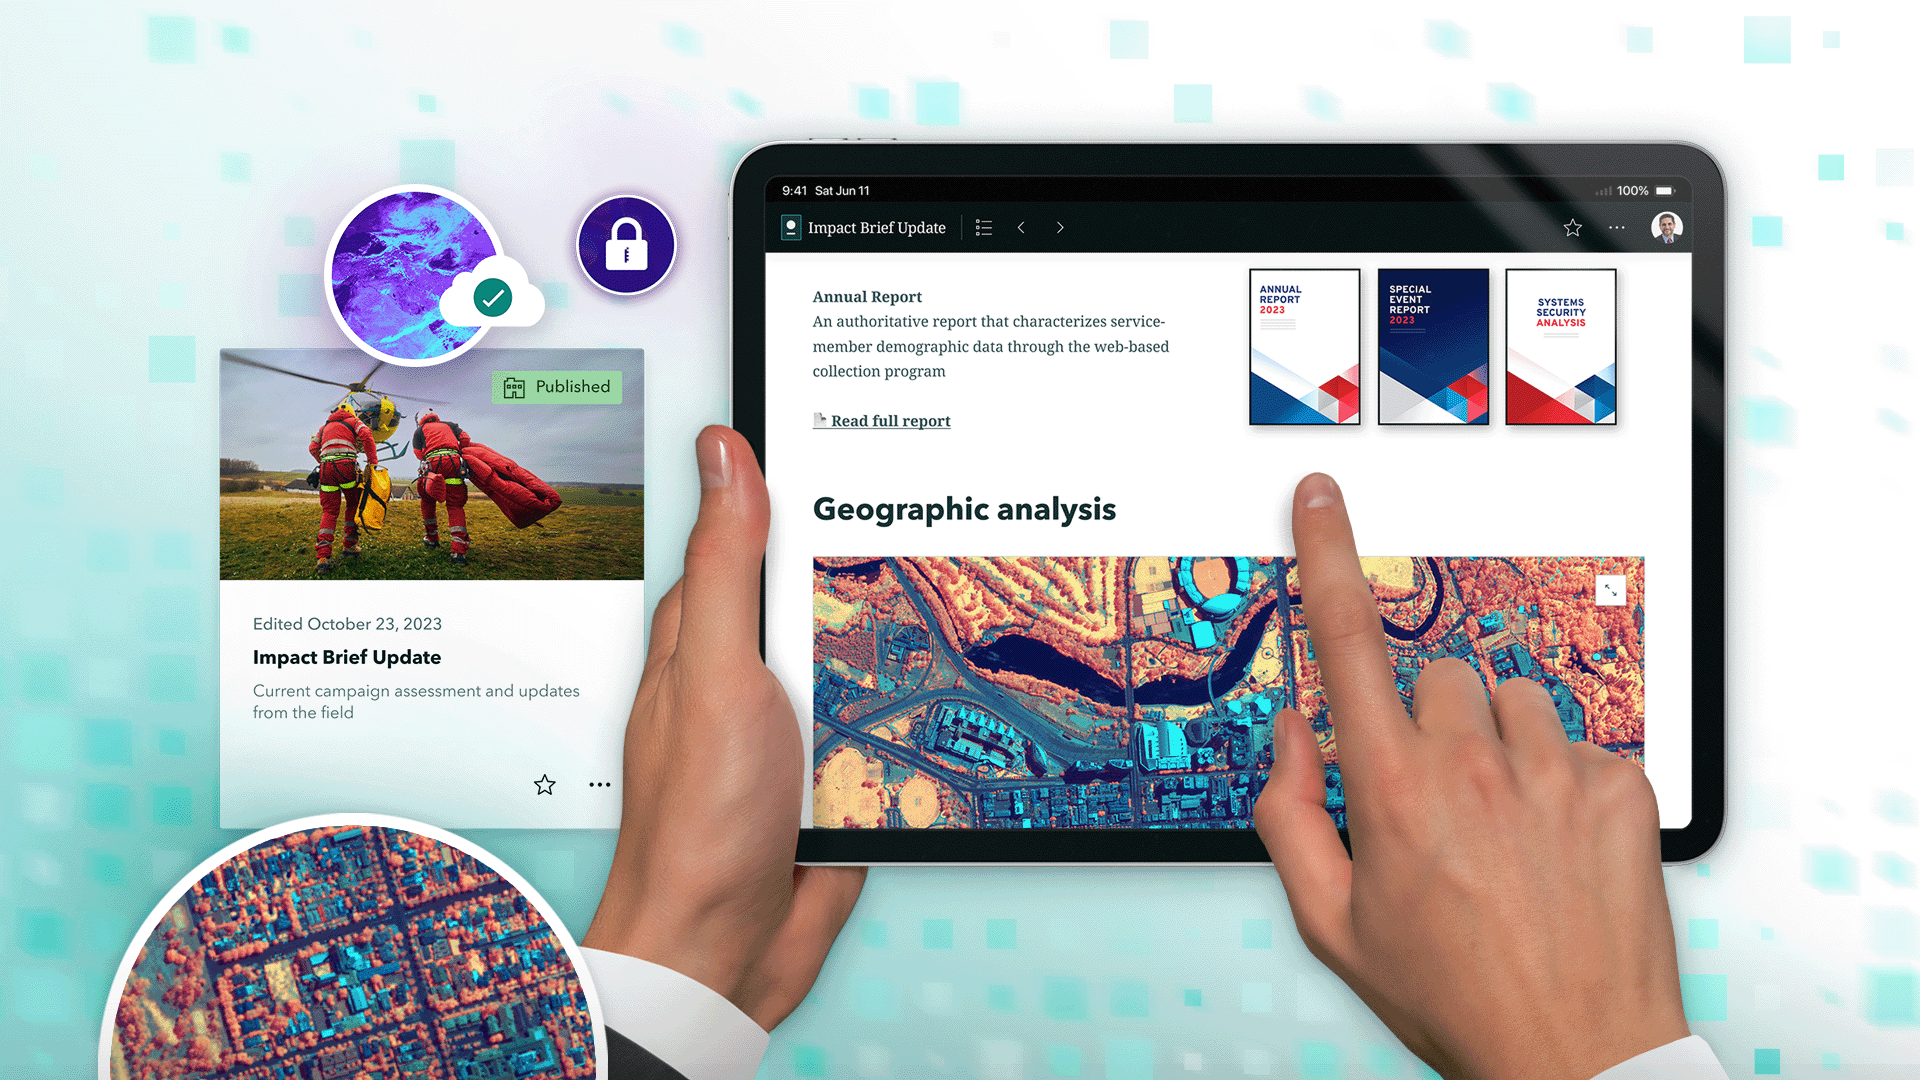 The briefings tablet app is shown next to a screenshot of the user interface of a briefing in the ArcGIS StoryMaps web app.